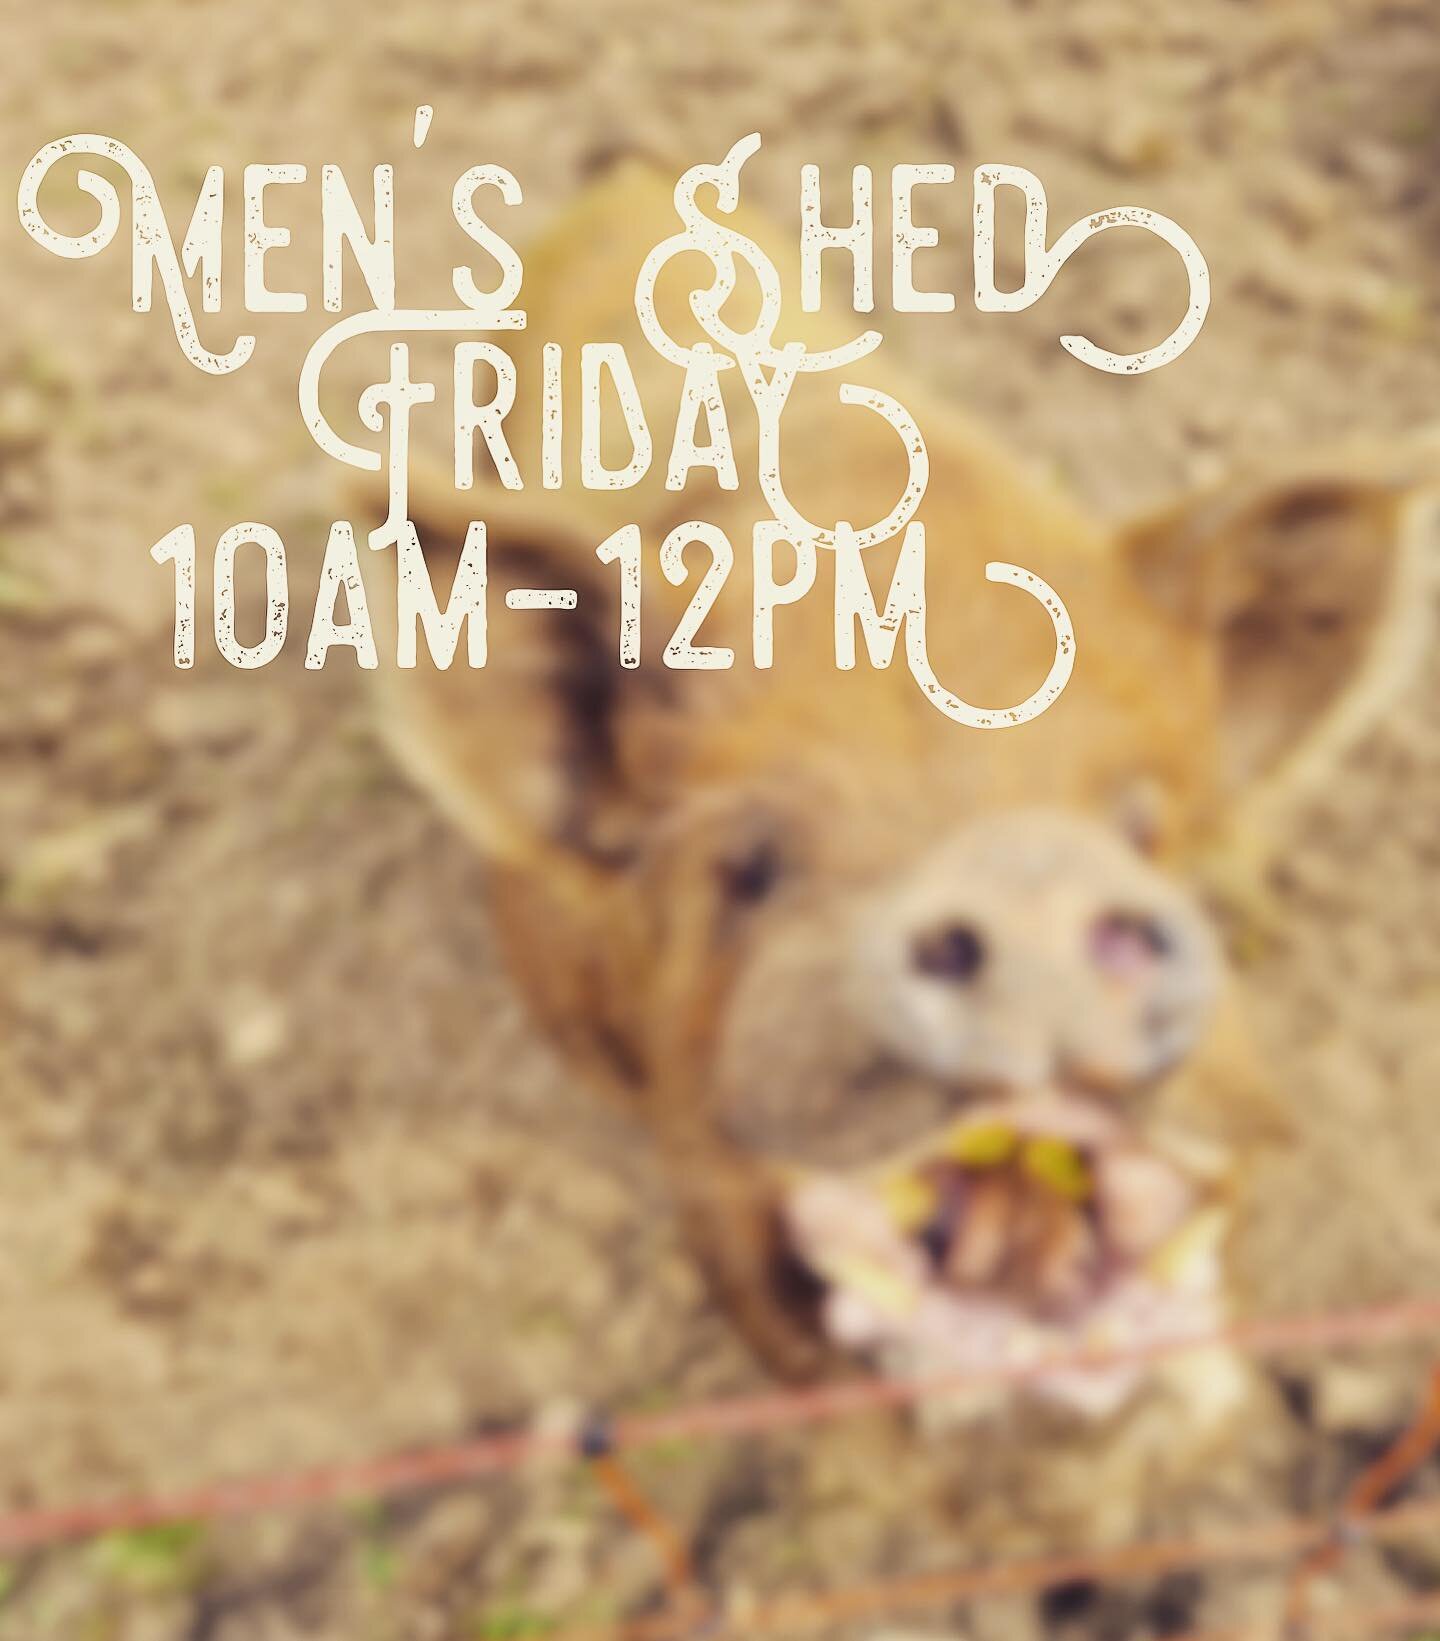 ***NEW MENS SHED HOURS***
.
.
Men&rsquo;s Shed will be running slightly reduced hours over the next few weeks as we look to reduce any potential risks and continue to make it an accessible space for local guys! We&rsquo;ll just be running a morning s